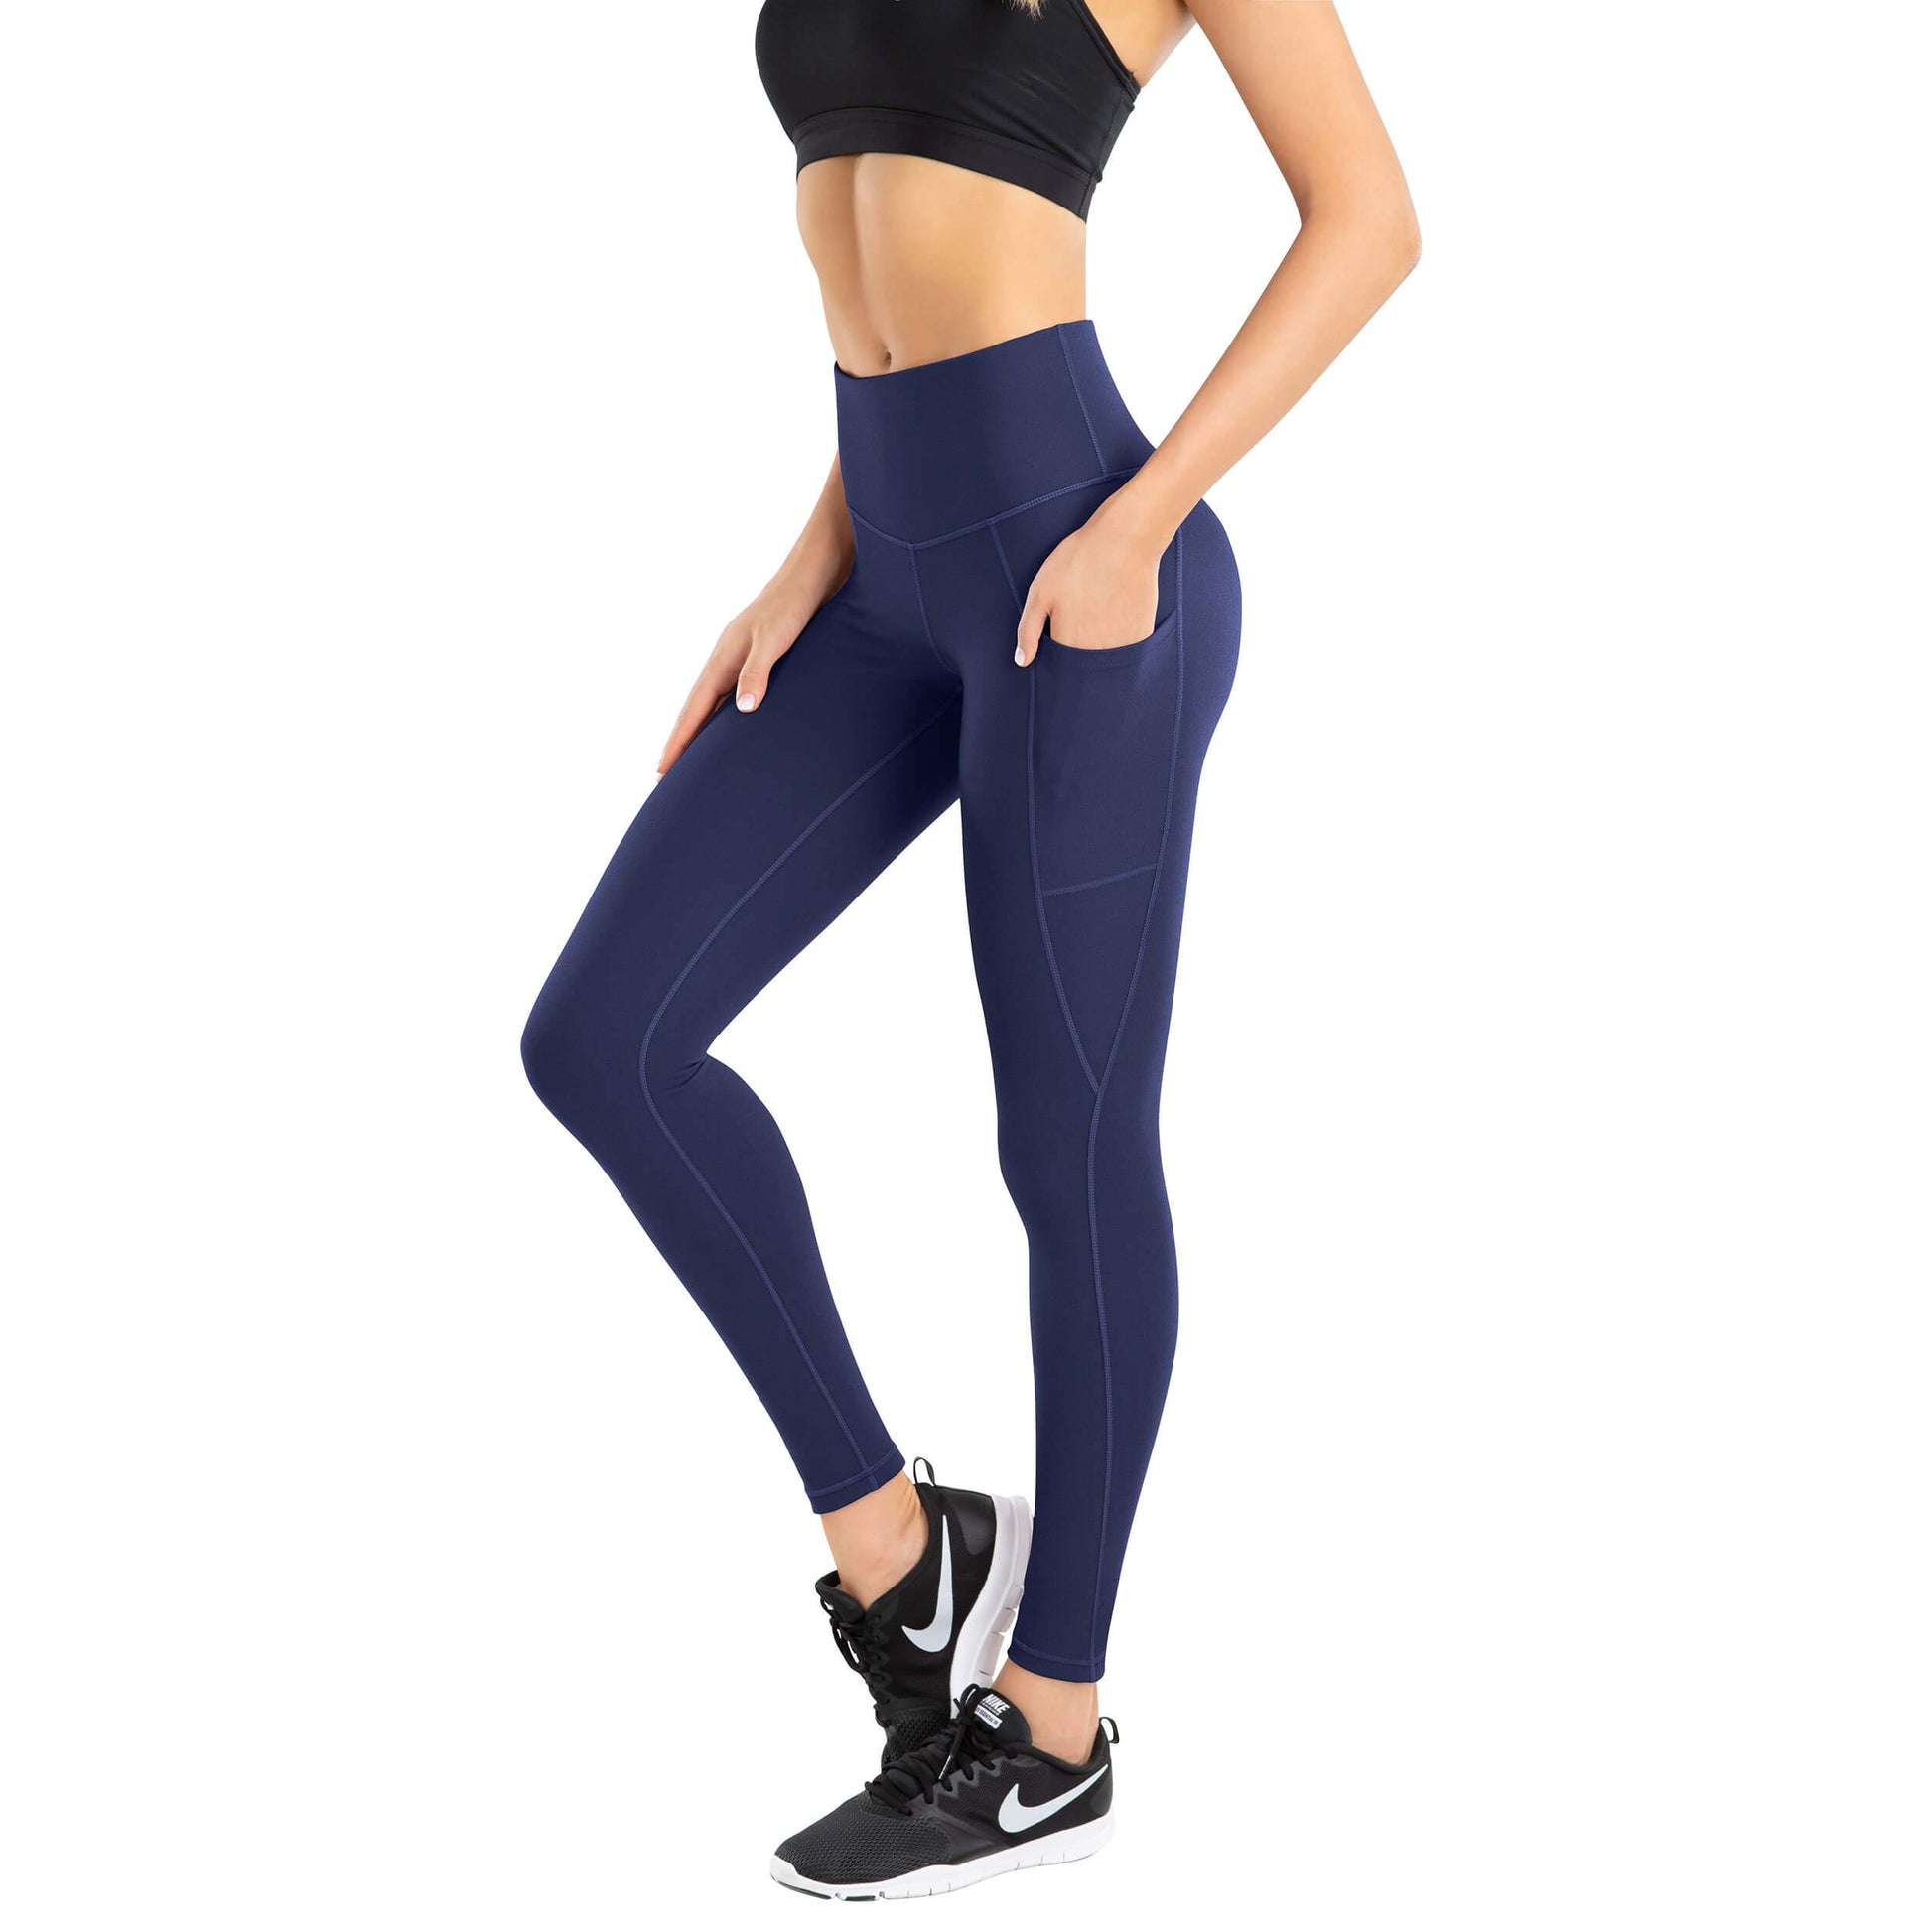 IUGA High Waist Yoga Pants with Pockets, Tummy Control, Workout Pants for  Women 4 Way Stretch Yoga Leggings with Pockets in Kenya